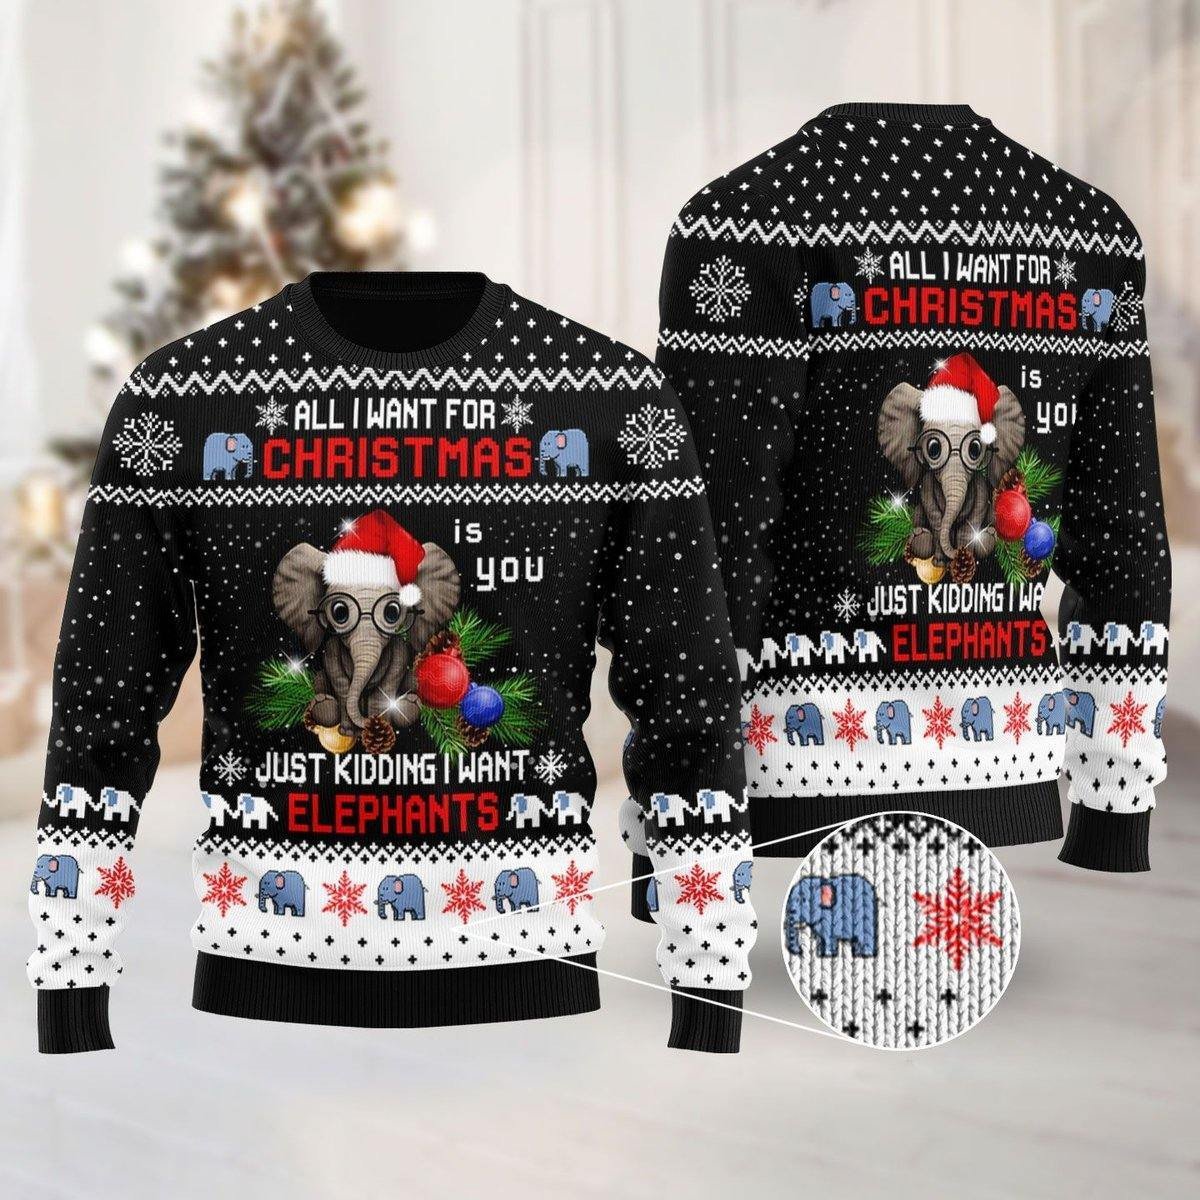 All I Want For Christmas Is Elephant Funny Christmas Sweater AOP Sweater Black S